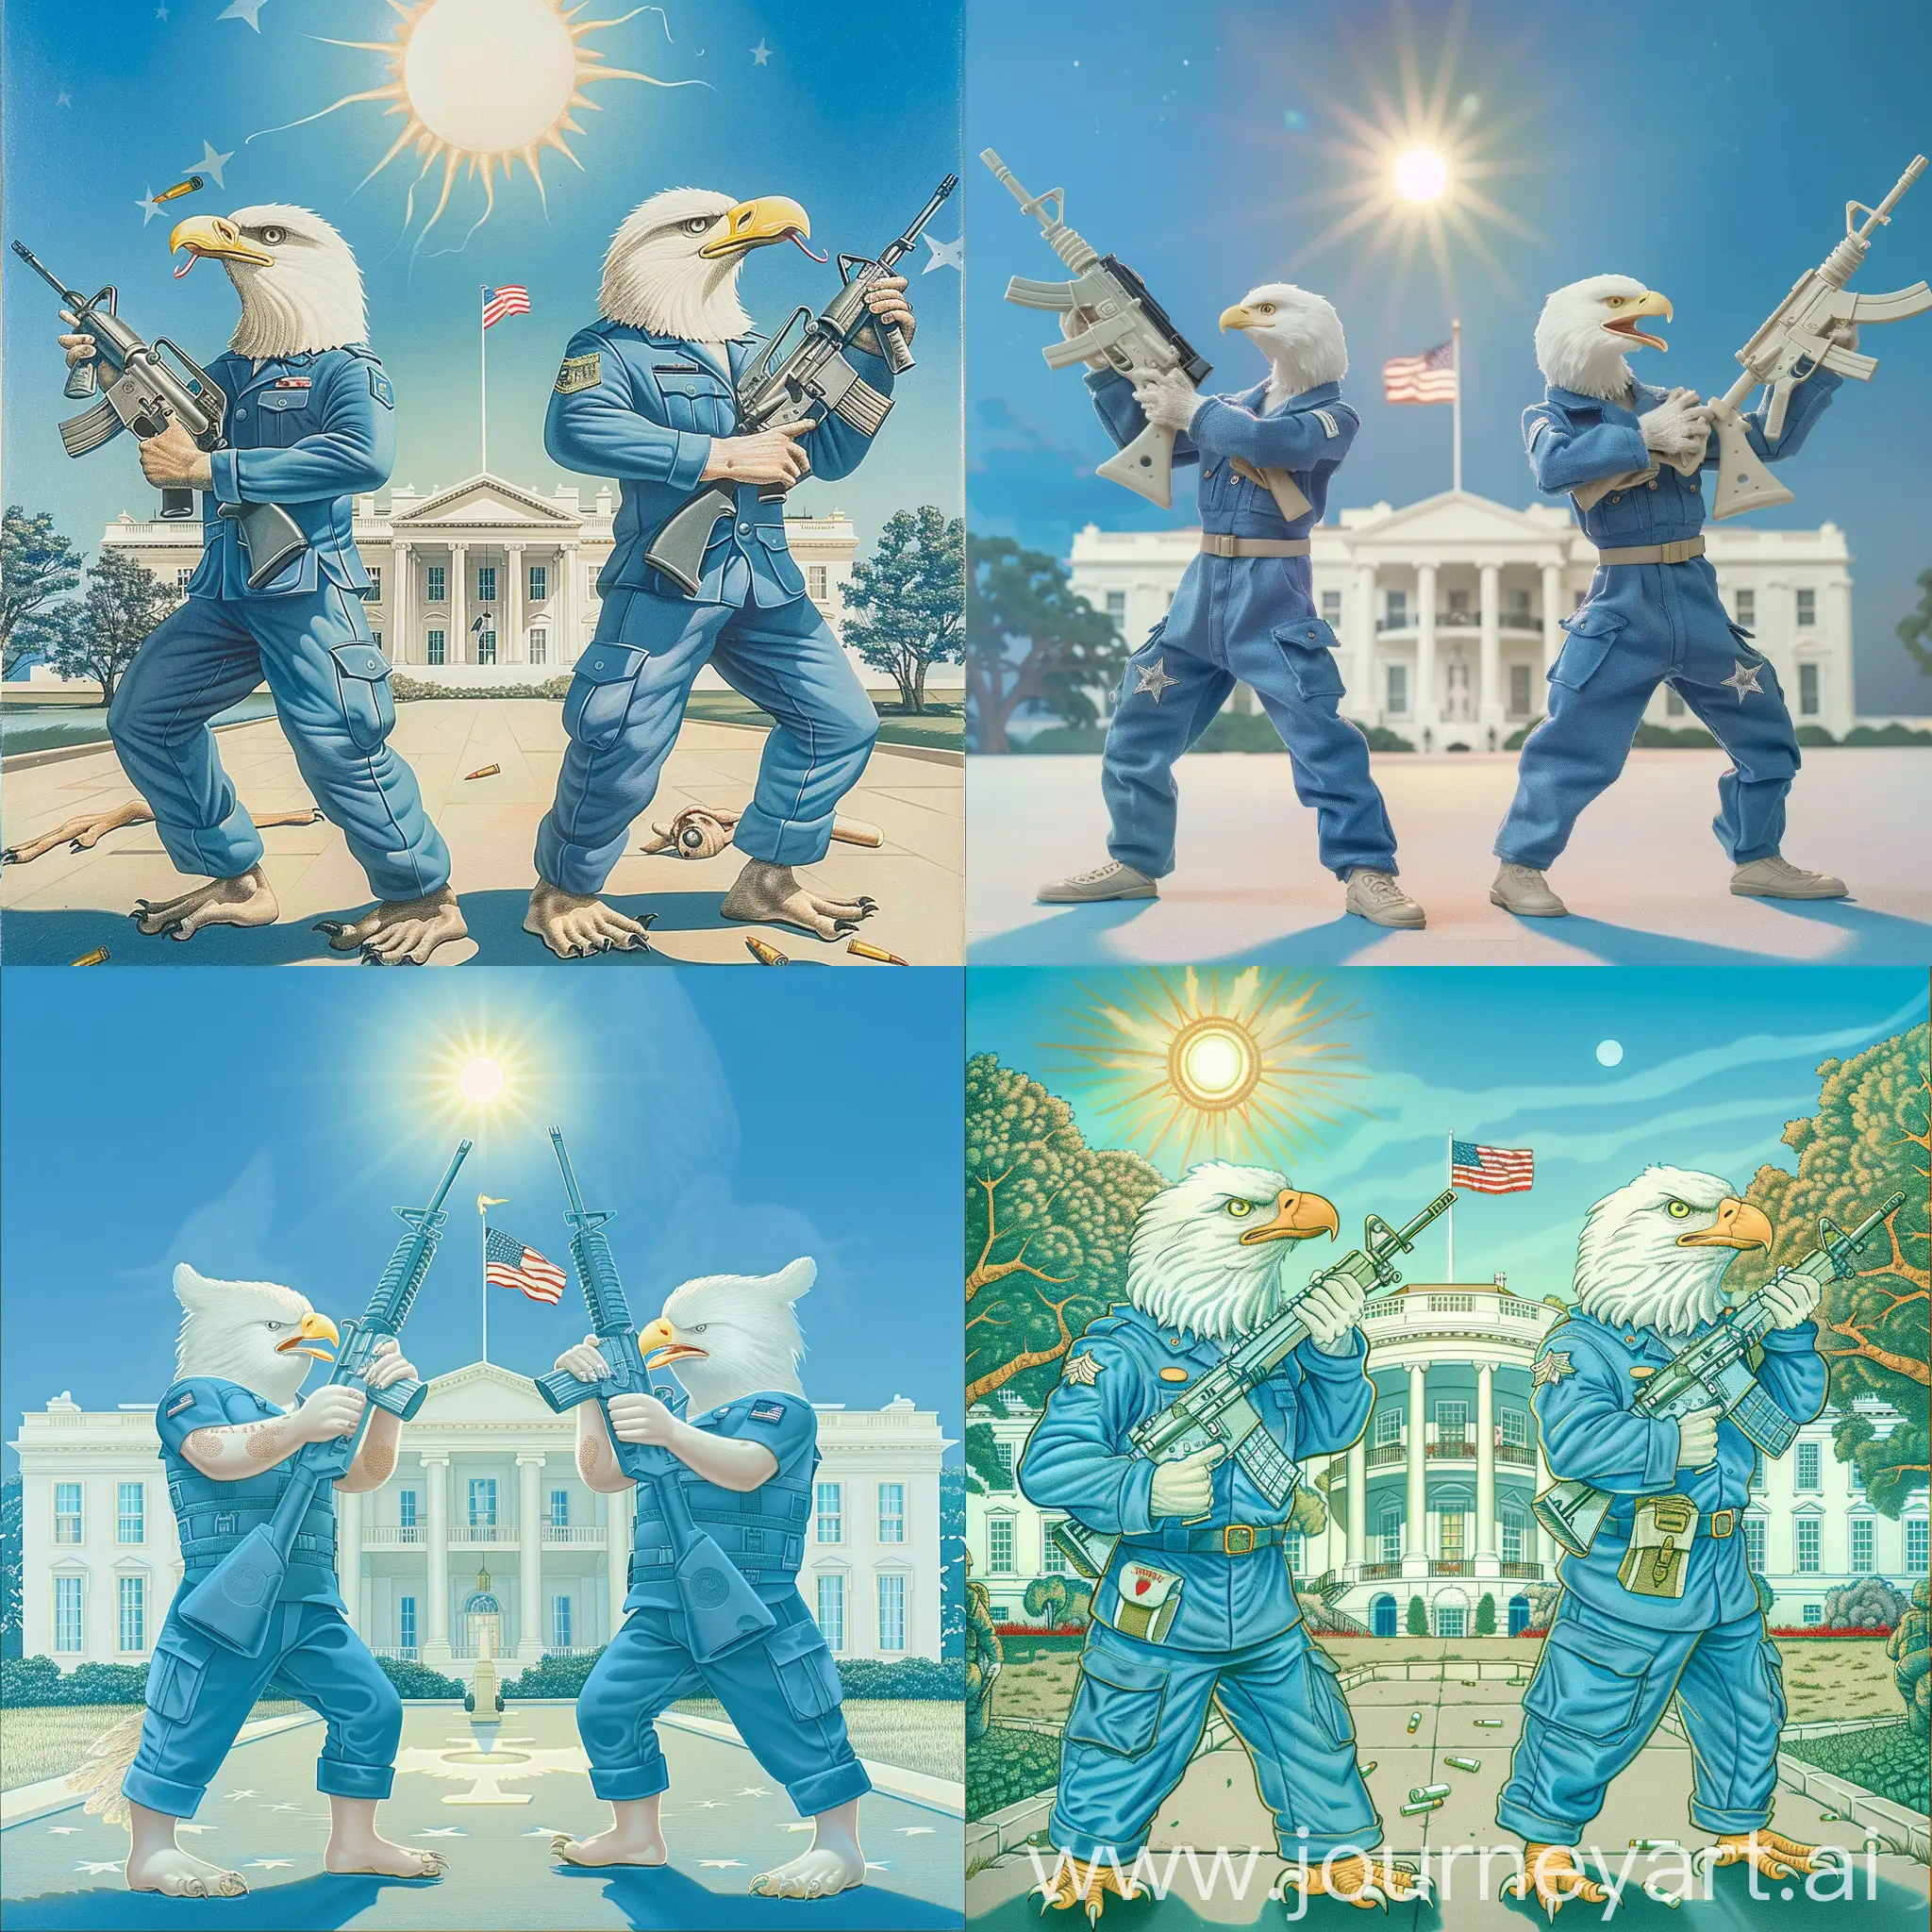 only two cute white eagles are in blue USA military uniforms and pants, without shoes, each of them hold one M-16 assault rifle in each of their hands, before Washington White House, there is an USA flag on the top of white house, sun in blue sky